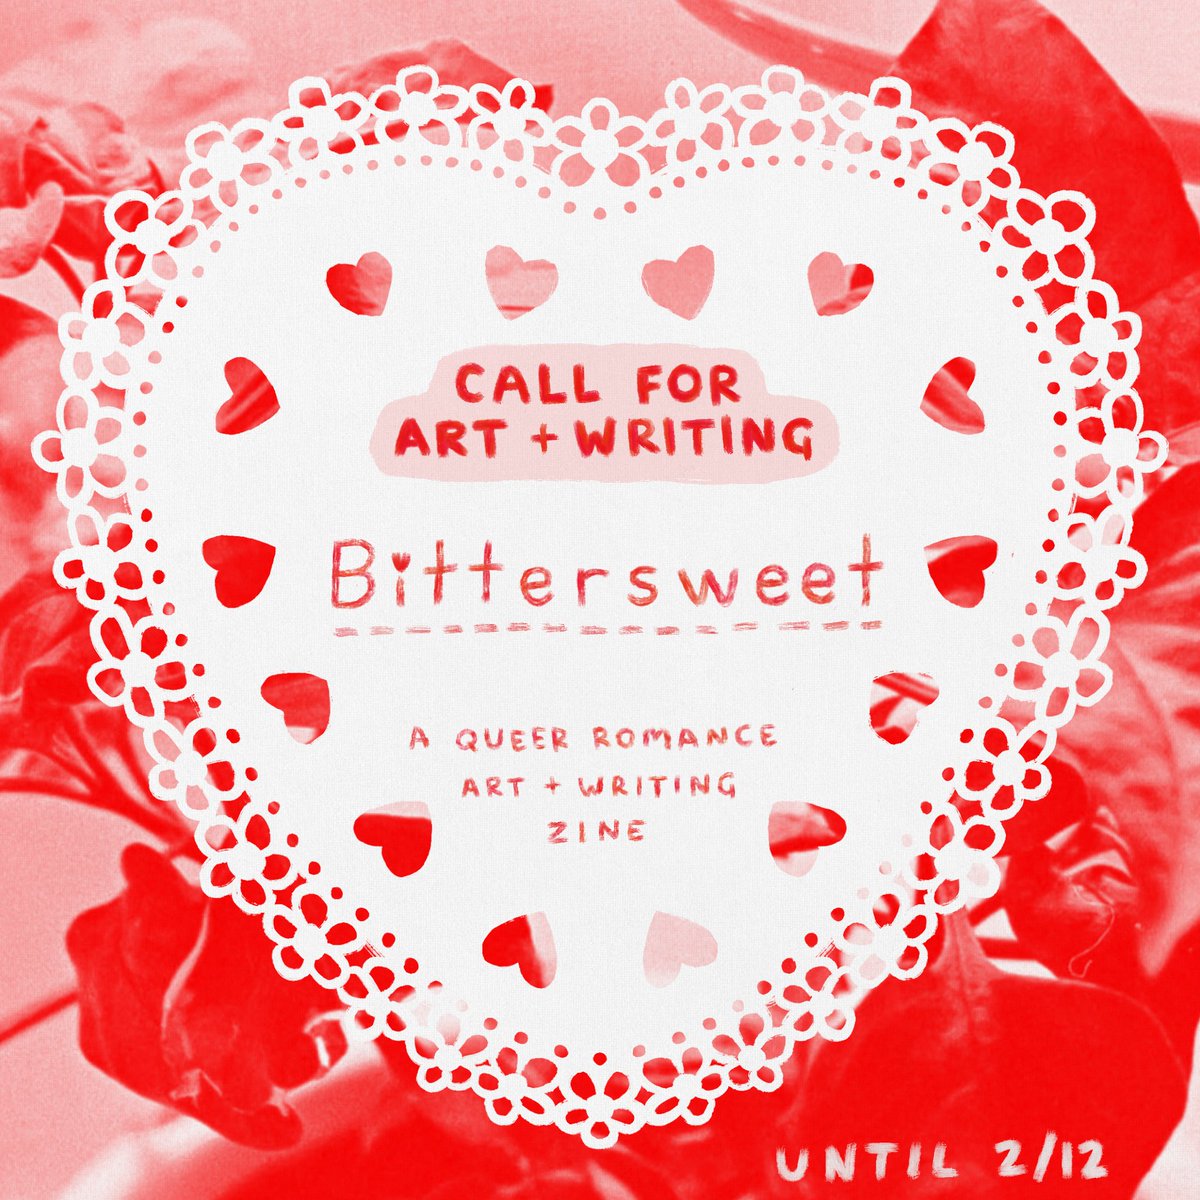 ❤️We're making a queer romance zine for valentine's!❤️

Looking for:
🖼️ Visual art in any medium
📜 Poetry, stories, or other writing
💗 Good gay content

OPEN UNTIL 2/12

#callforsubmissions #submissionsopen #indiepress #queerart #callforart #writingcommunity #writersoftwitter